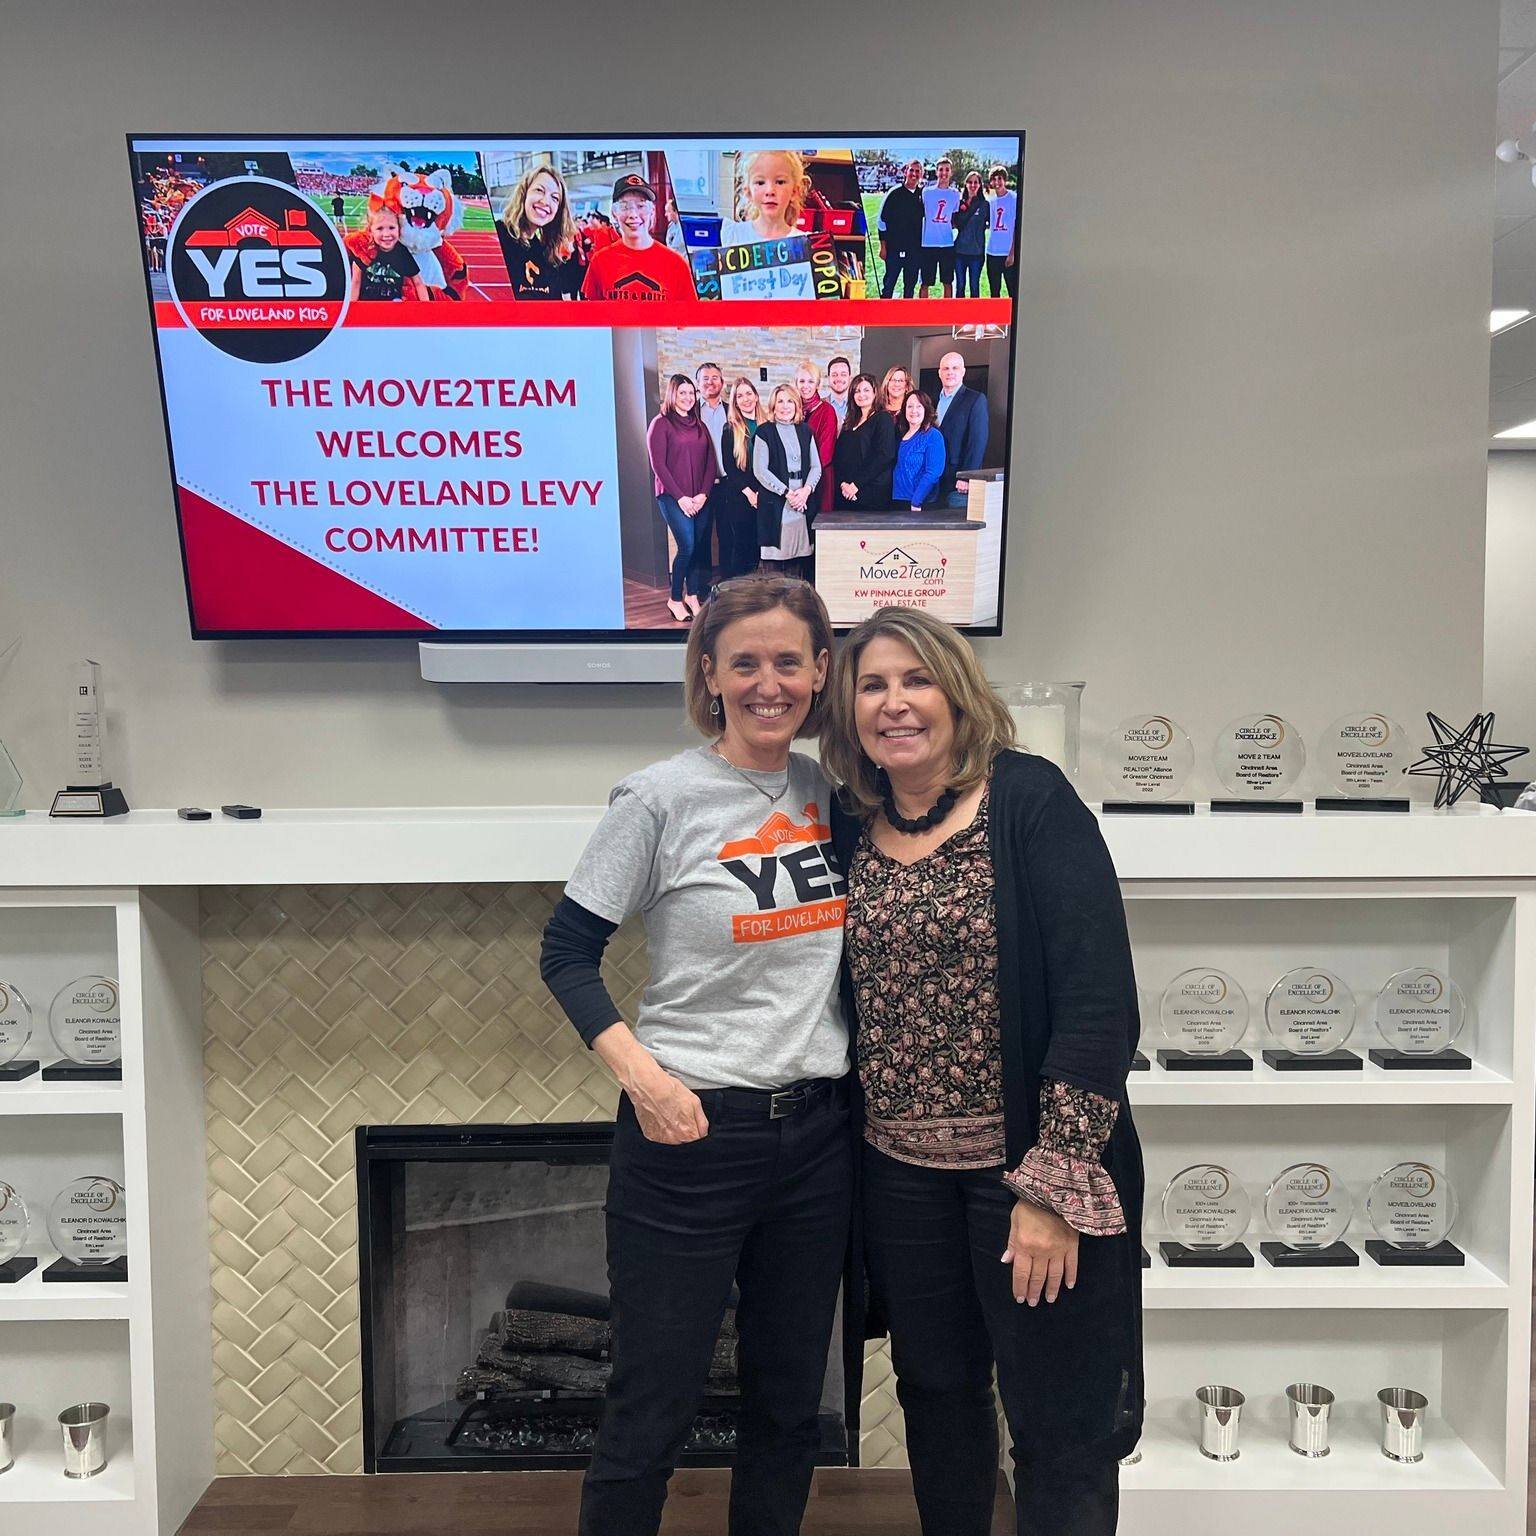 A special thanks to Ellie Kowalchik, Realtor - Keller Williams Pinnacle Group for hosting our phone banking volunteers in her team's beautiful new office space and to Sam David of Loveland LaRosa's for supplying dinner for all our of phone bankers!  